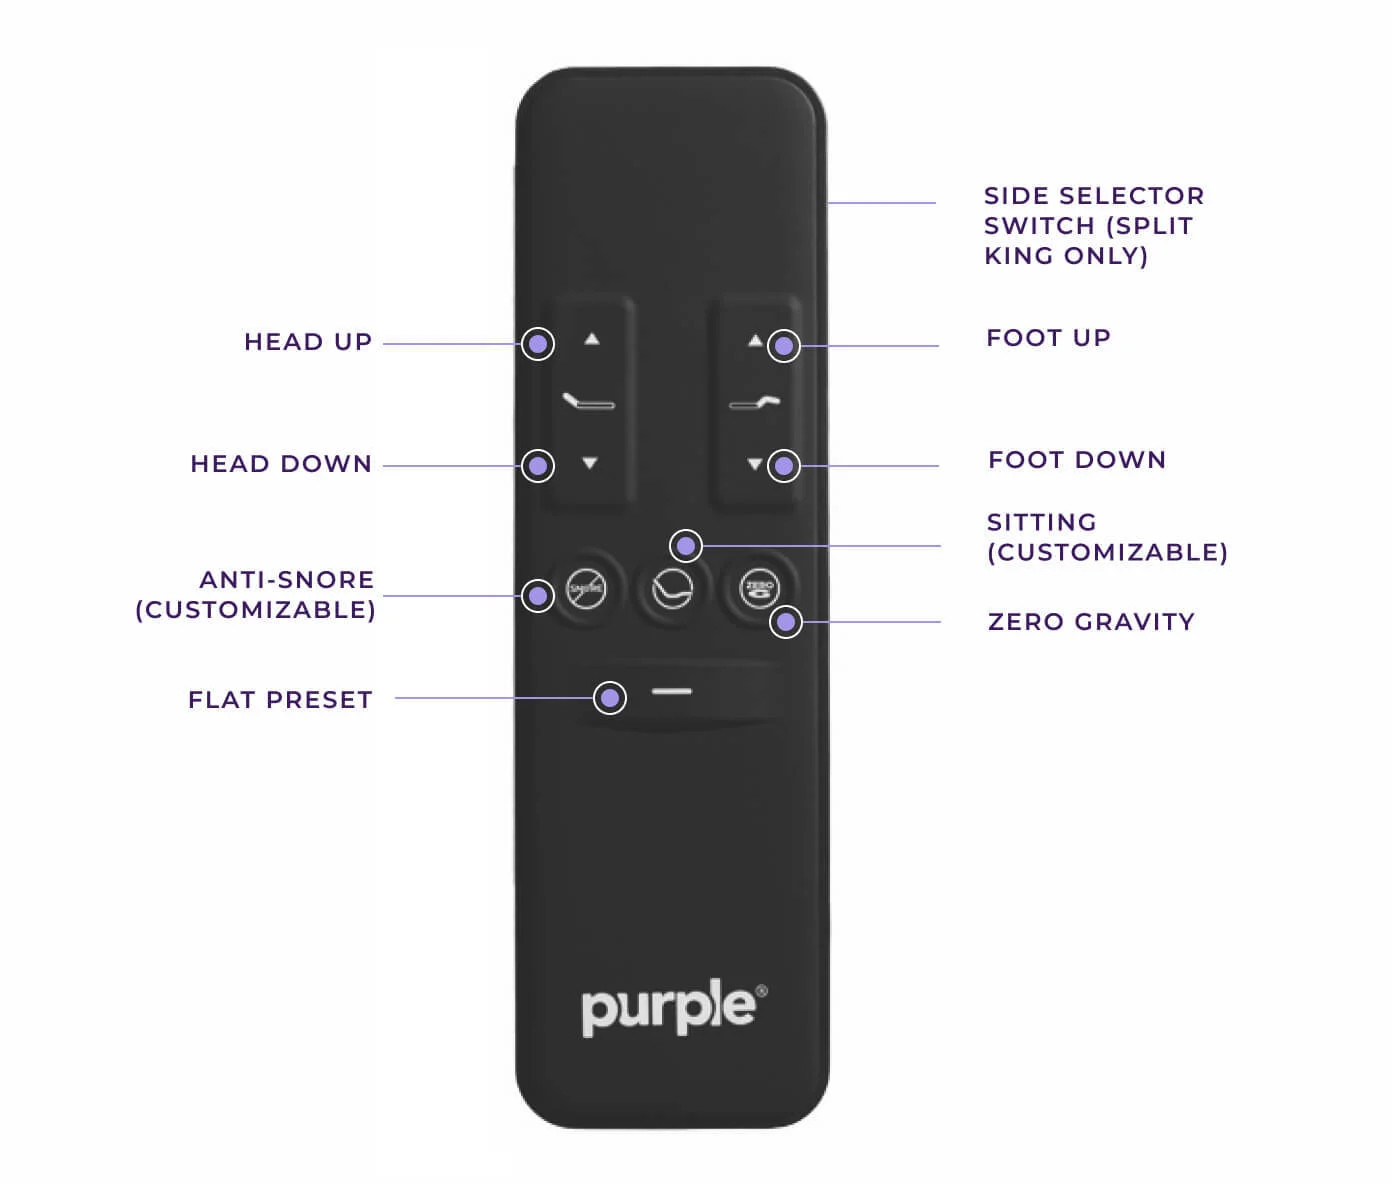 is the purple adjustable base easy to use?